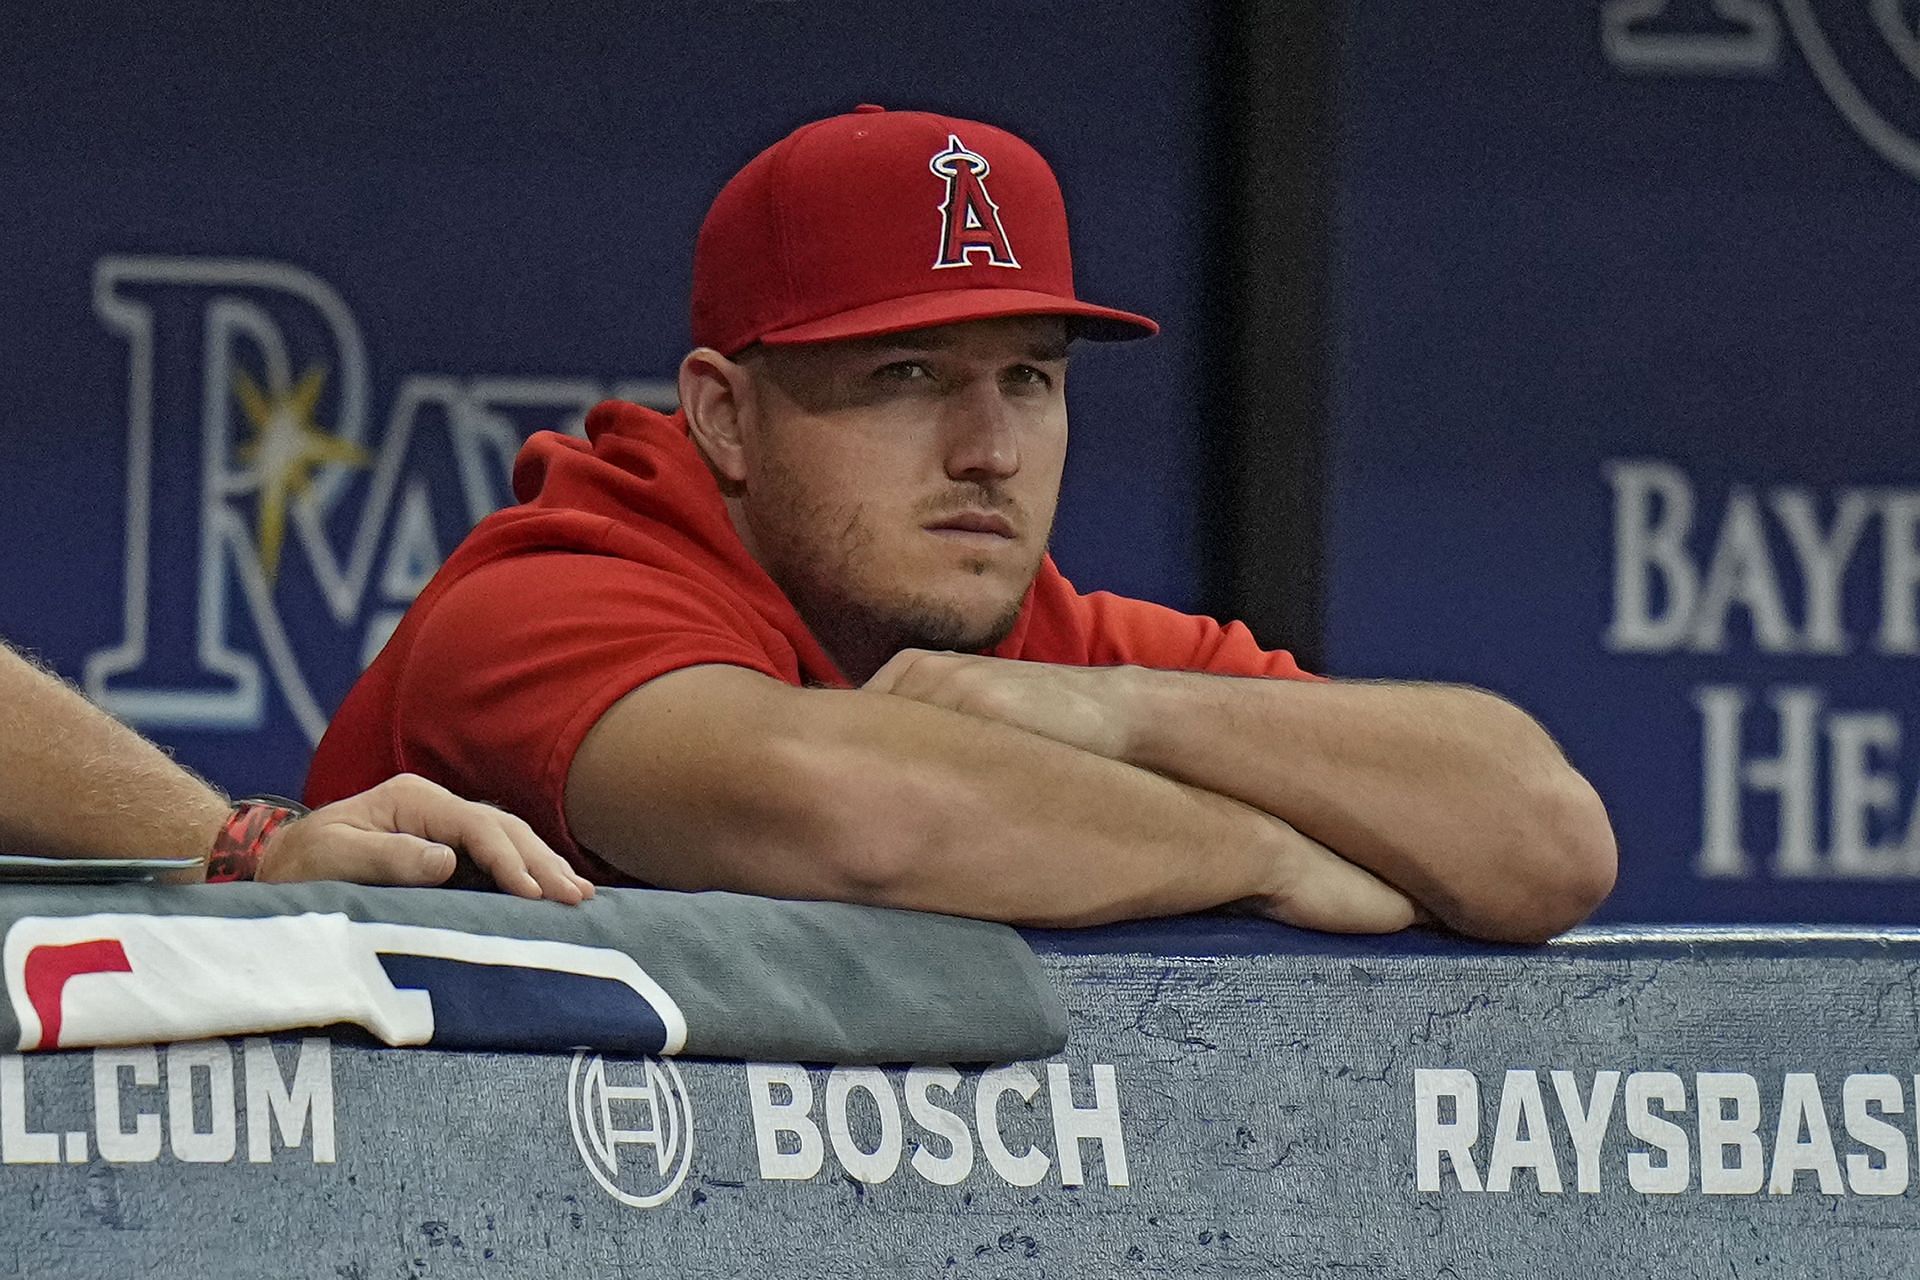 Los Angeles Angels outfielder Mike Trout watches from the bench against the Tampa Bay Rays.